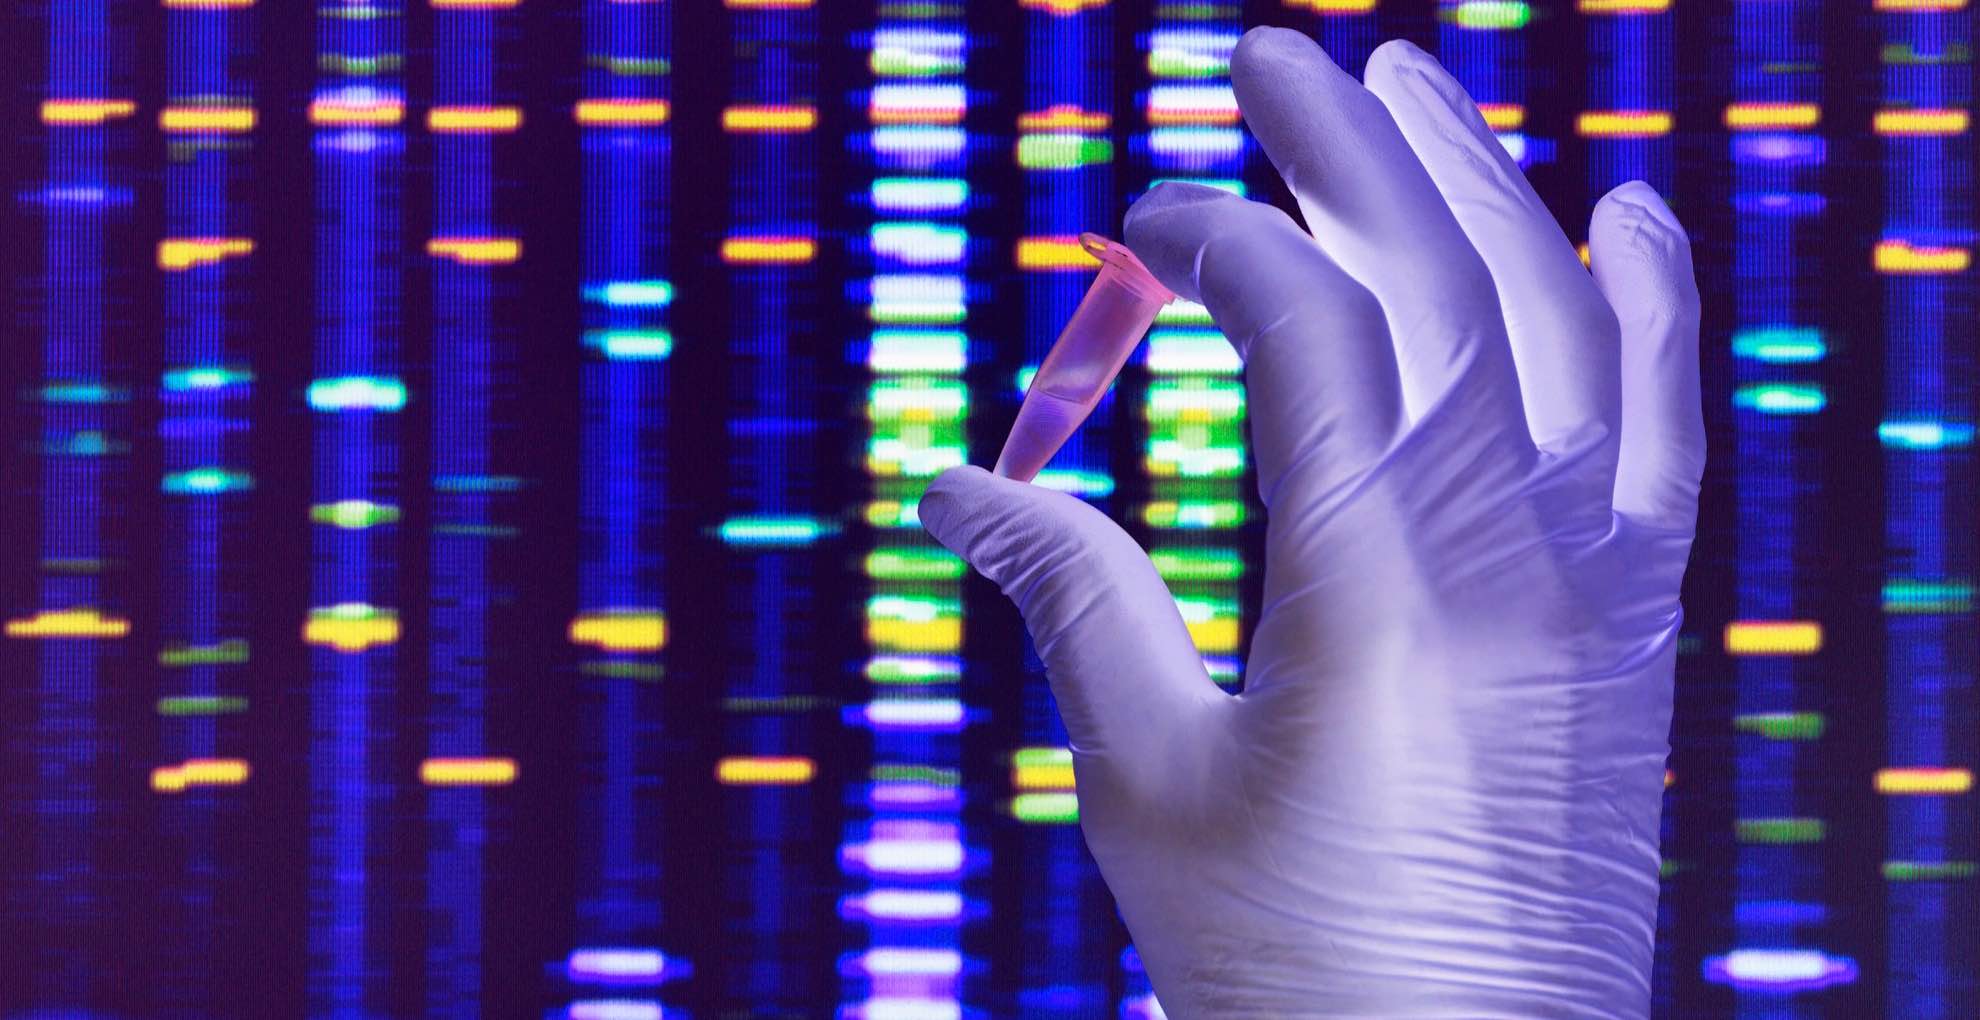 A gloved hand holds a DNA sample against the results of a genetic test shown on a screen.